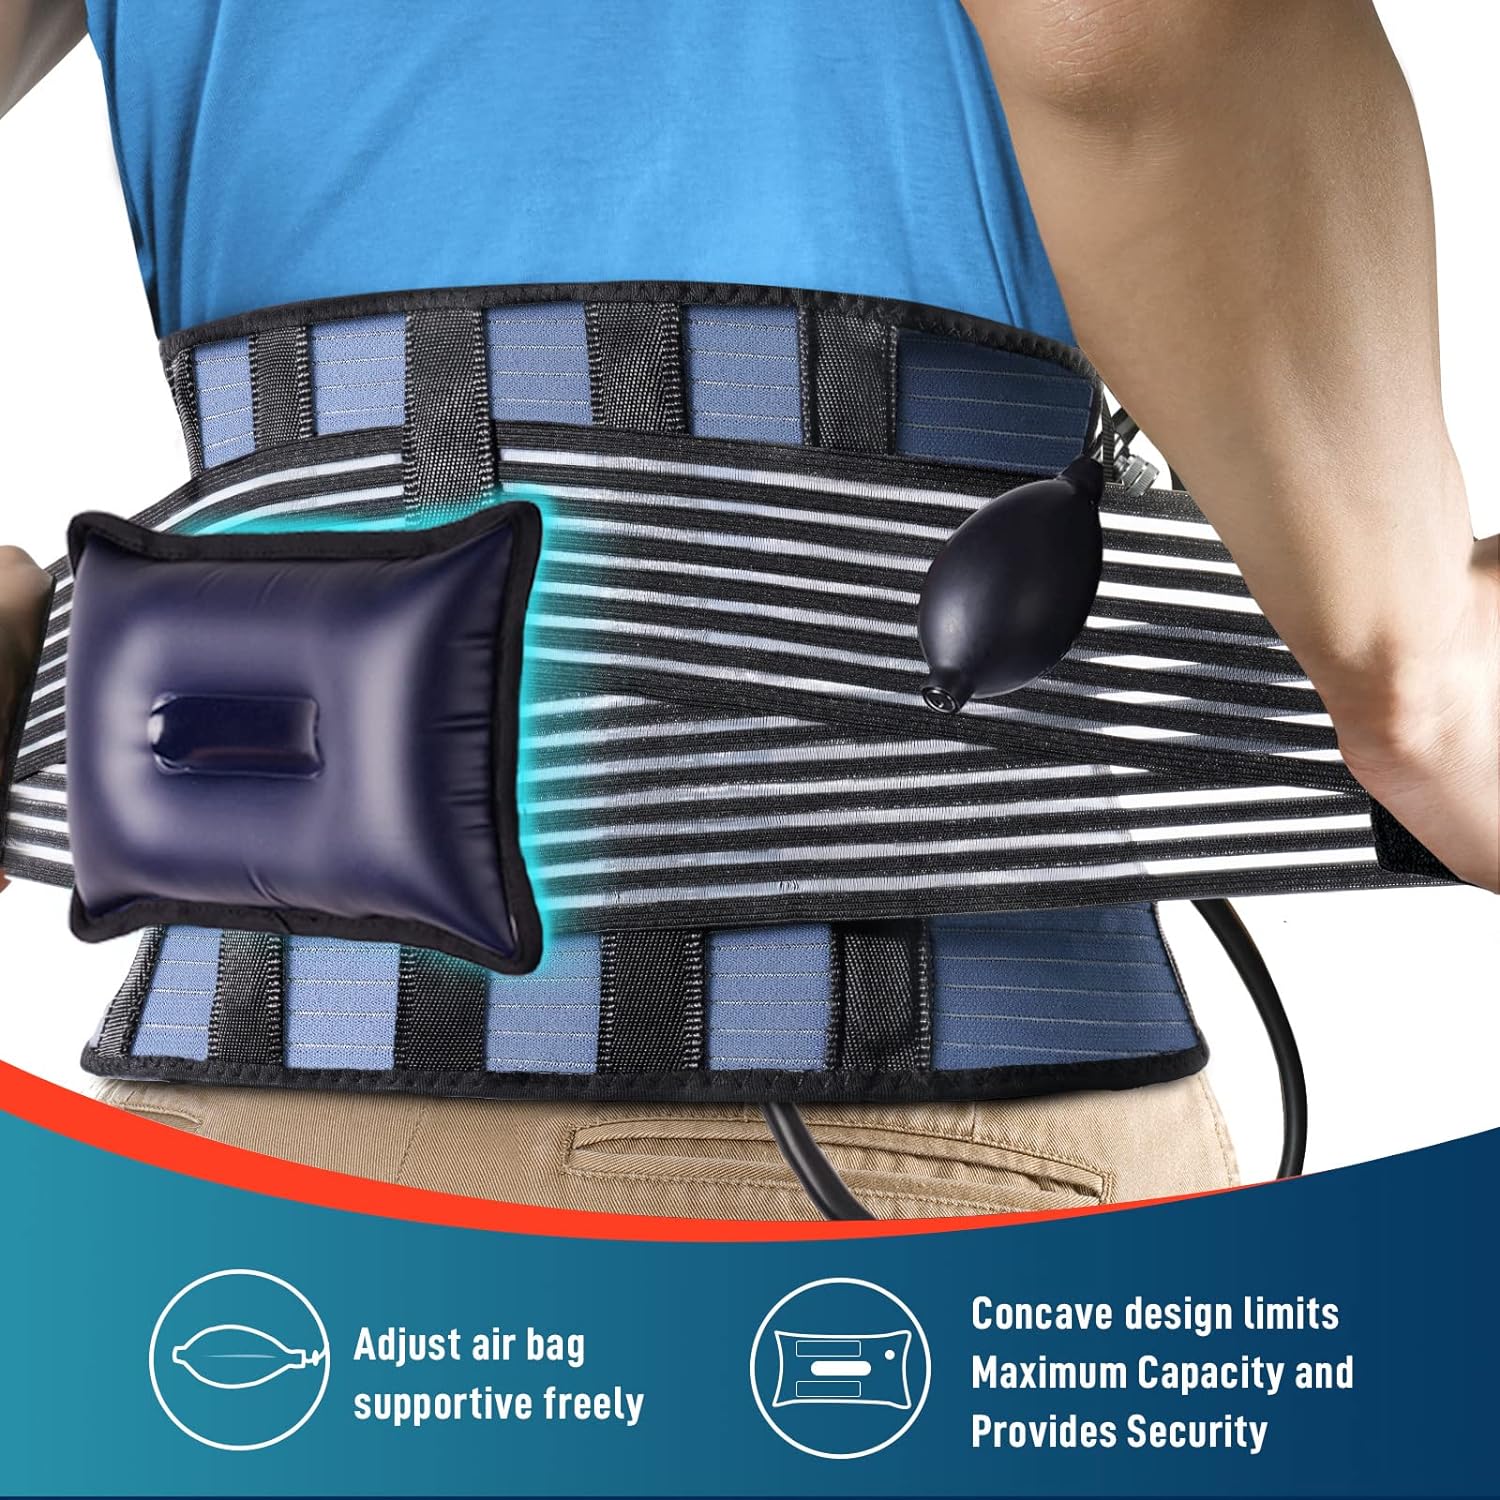 Generic FEATOL Back Brace with Inflatable Pad for Men Women Lower Back Pain Relief, Back Support Belt for Work Heavy Lifting, Breathabl